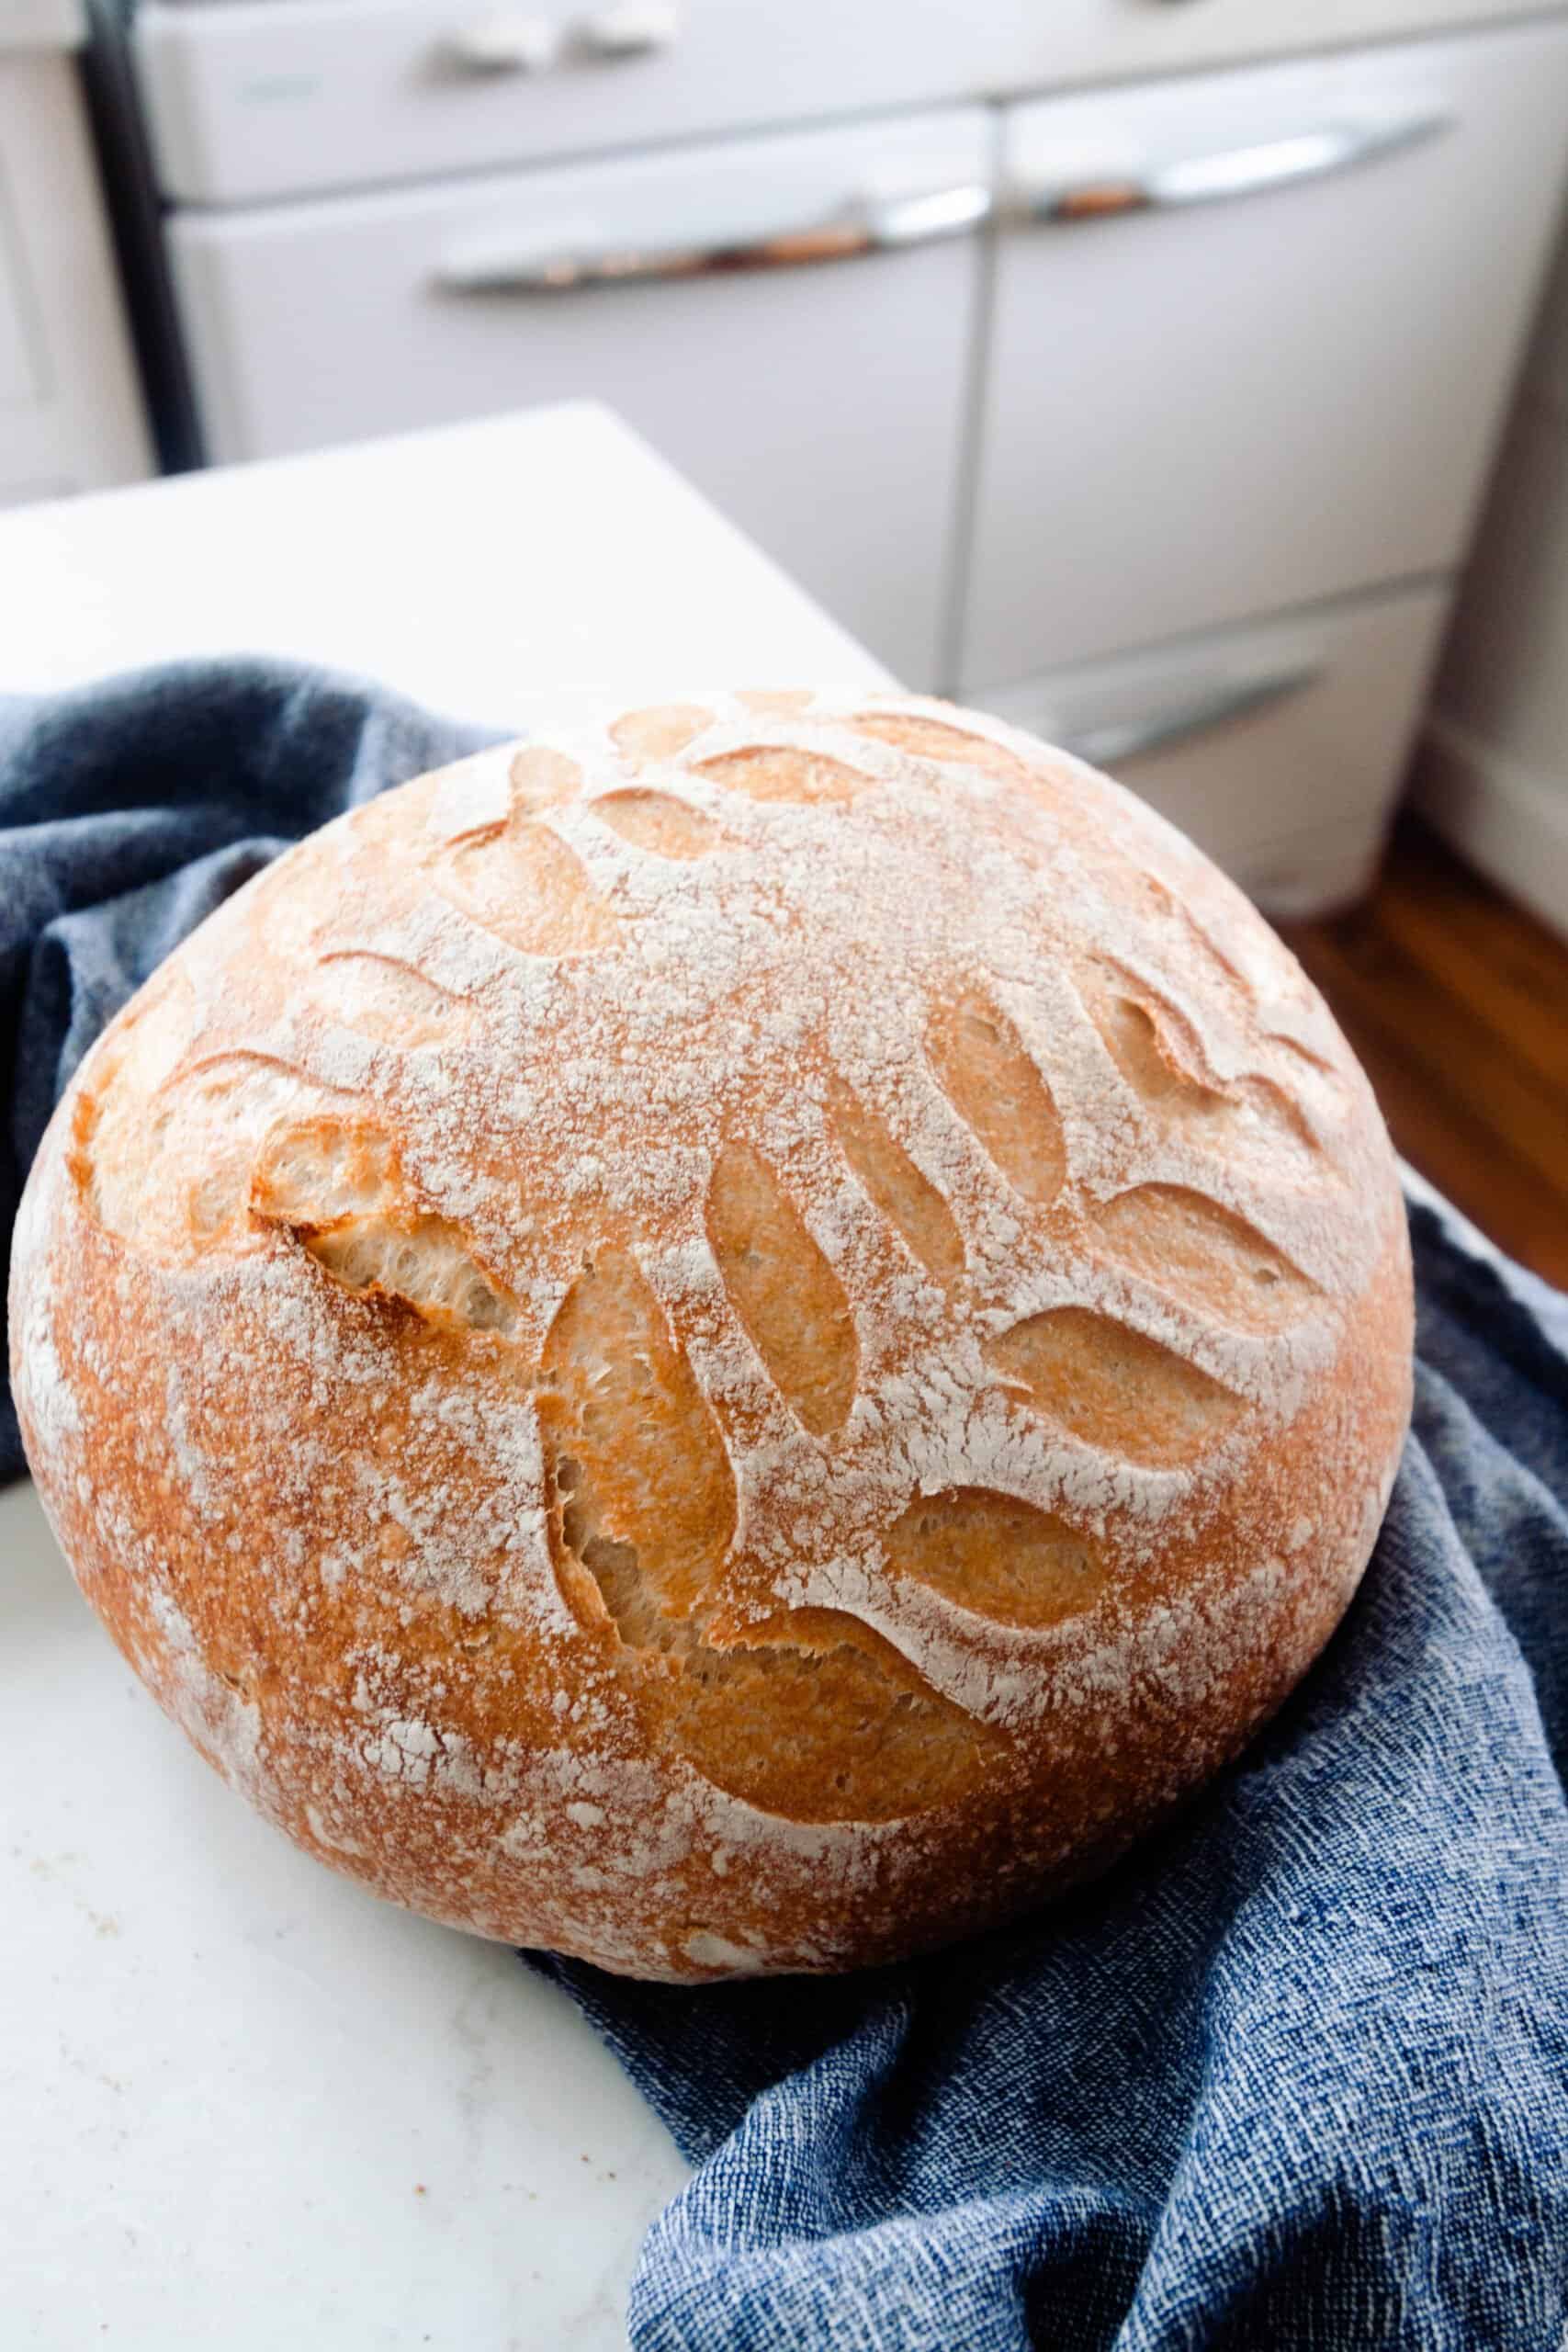 How To Tell When Sourdough Bread Is Done (cooked through) - The